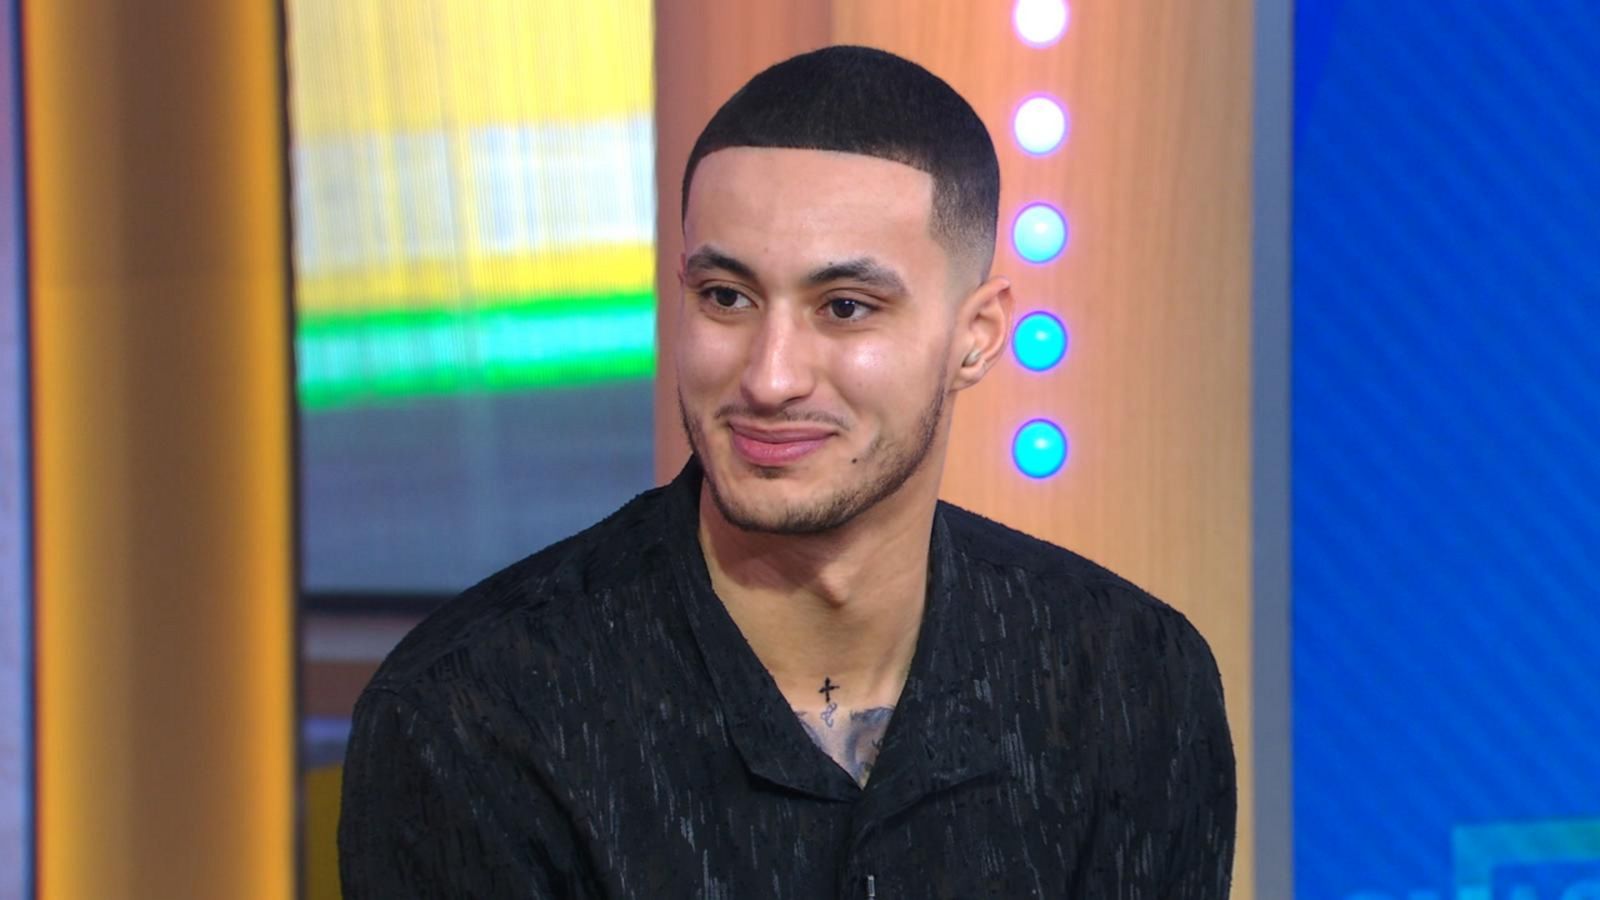 Kyle Kuzma Visits Michigan Jail to Speak with and Donate to Female Inmates: ‘This Is My Community’